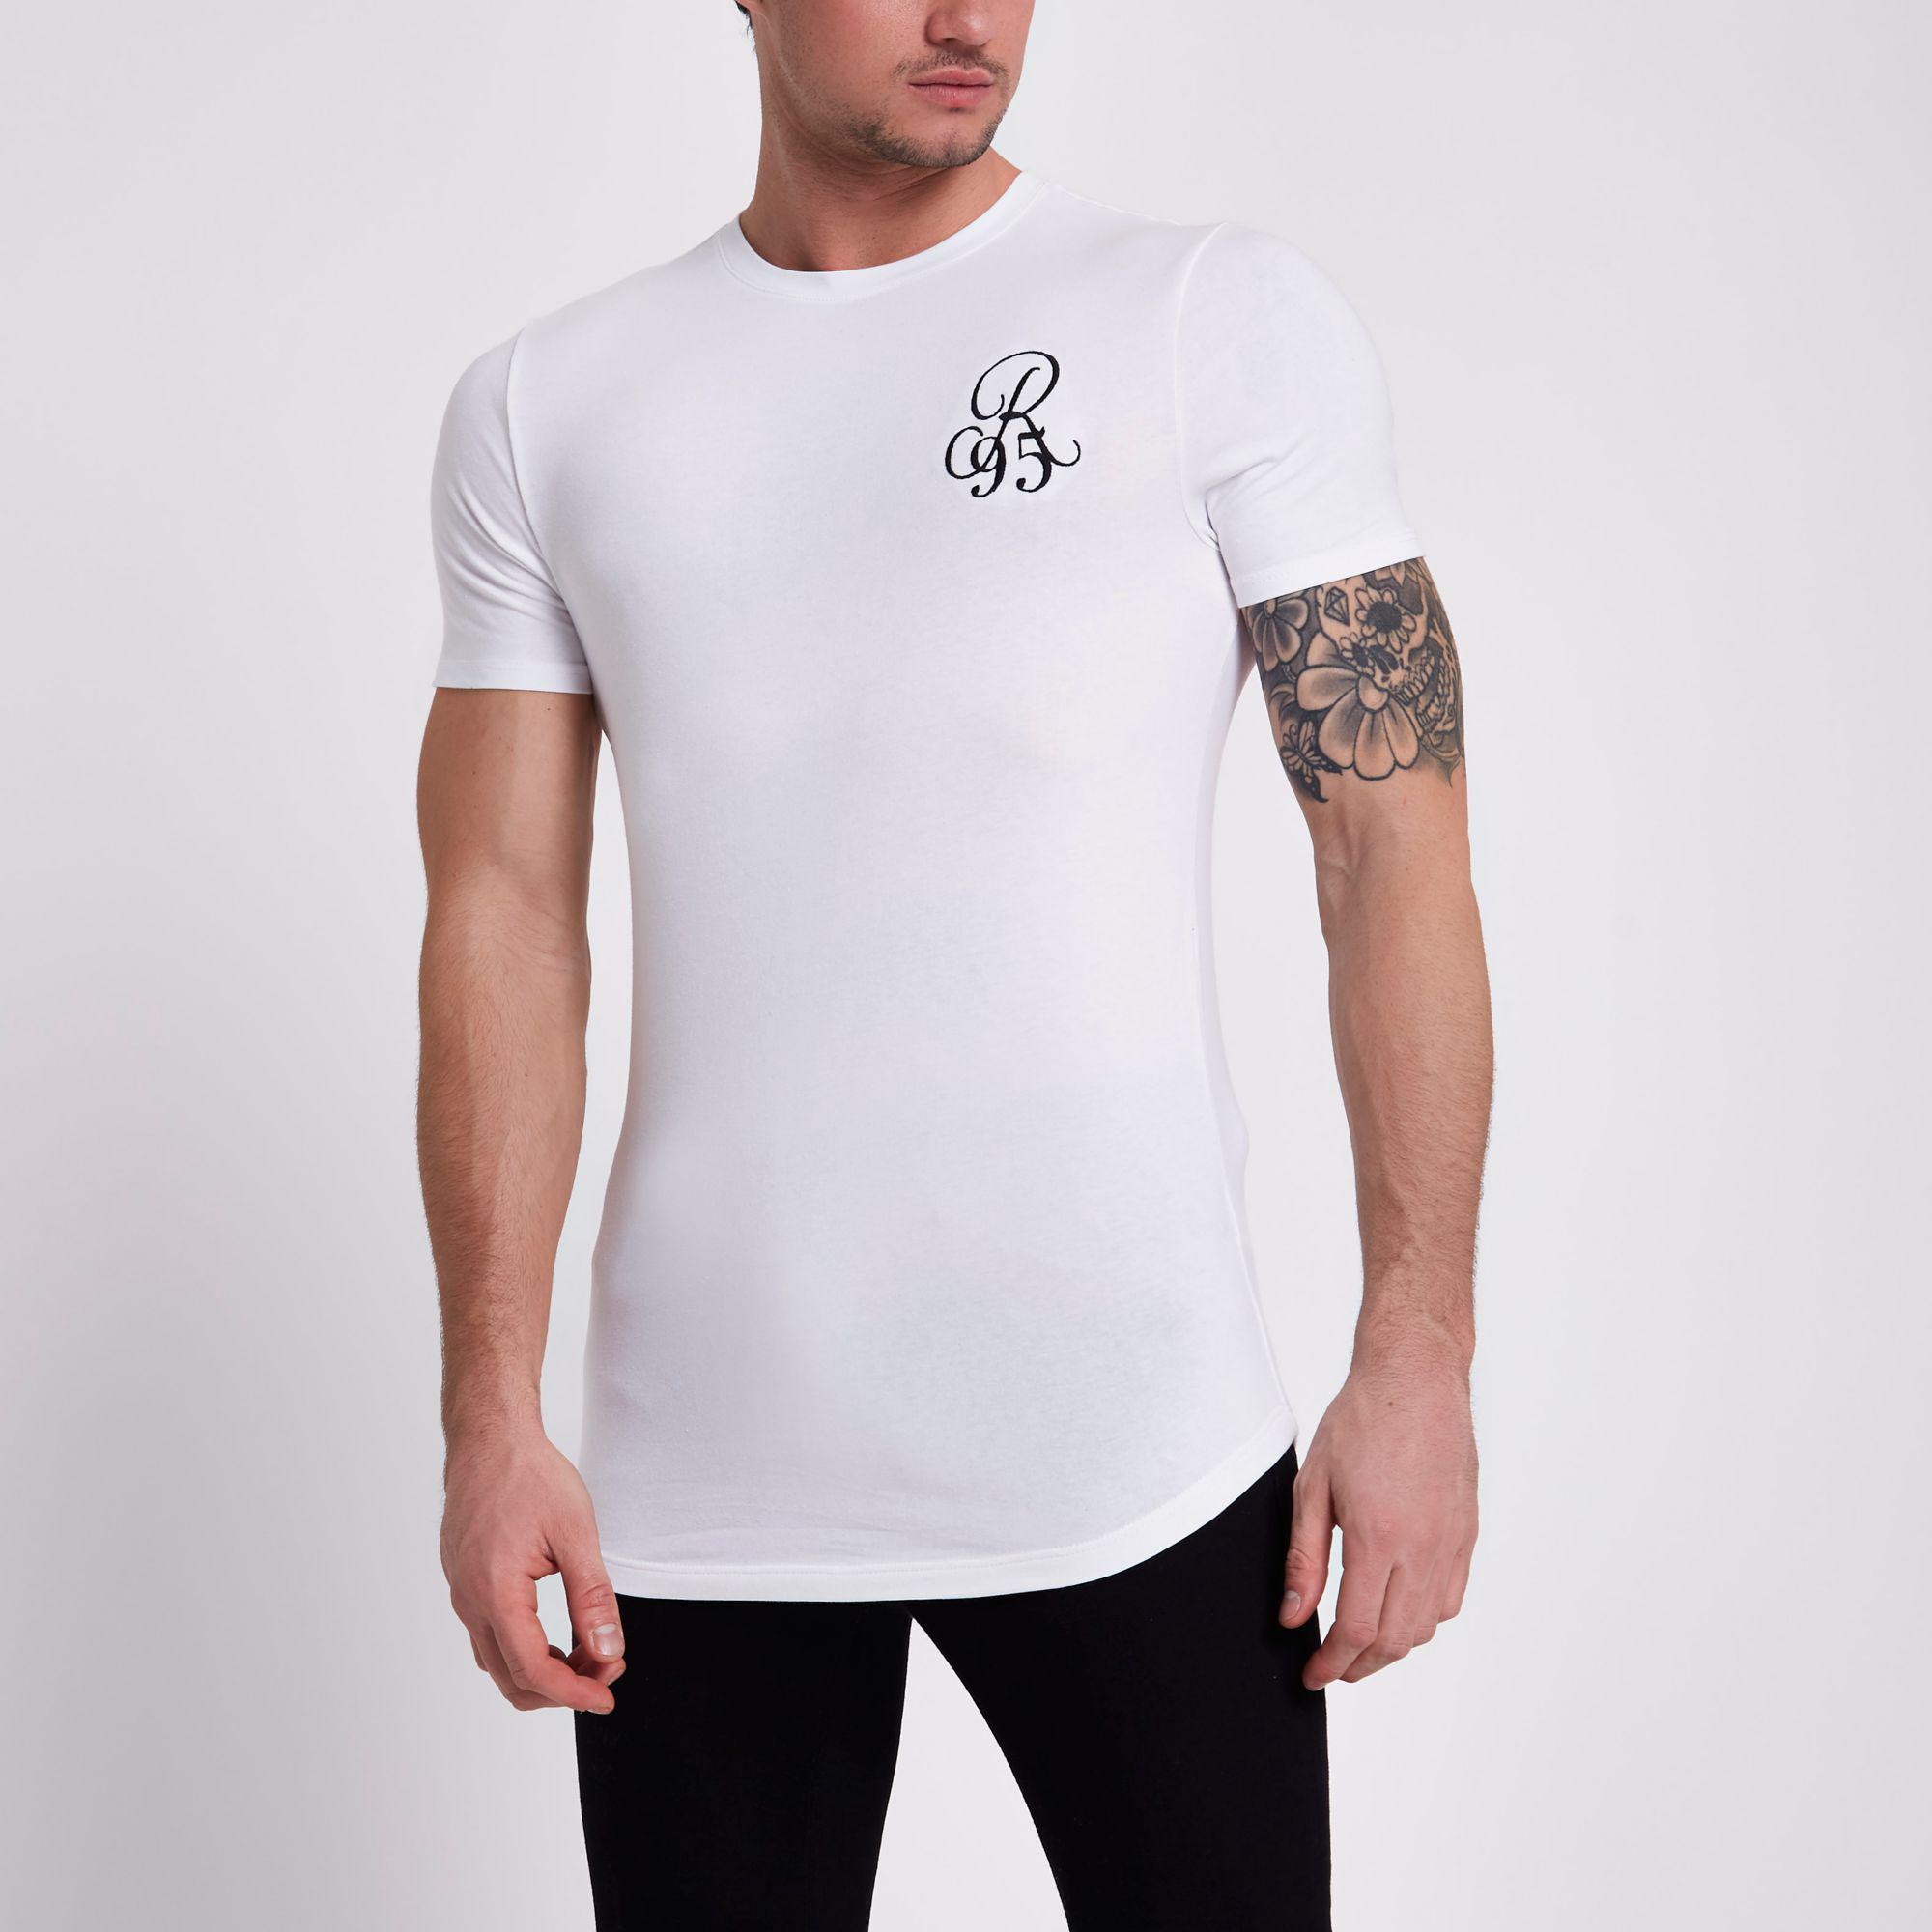 River Island Cotton Muscle Fit 'r95' T-shirt in White for Men - Lyst